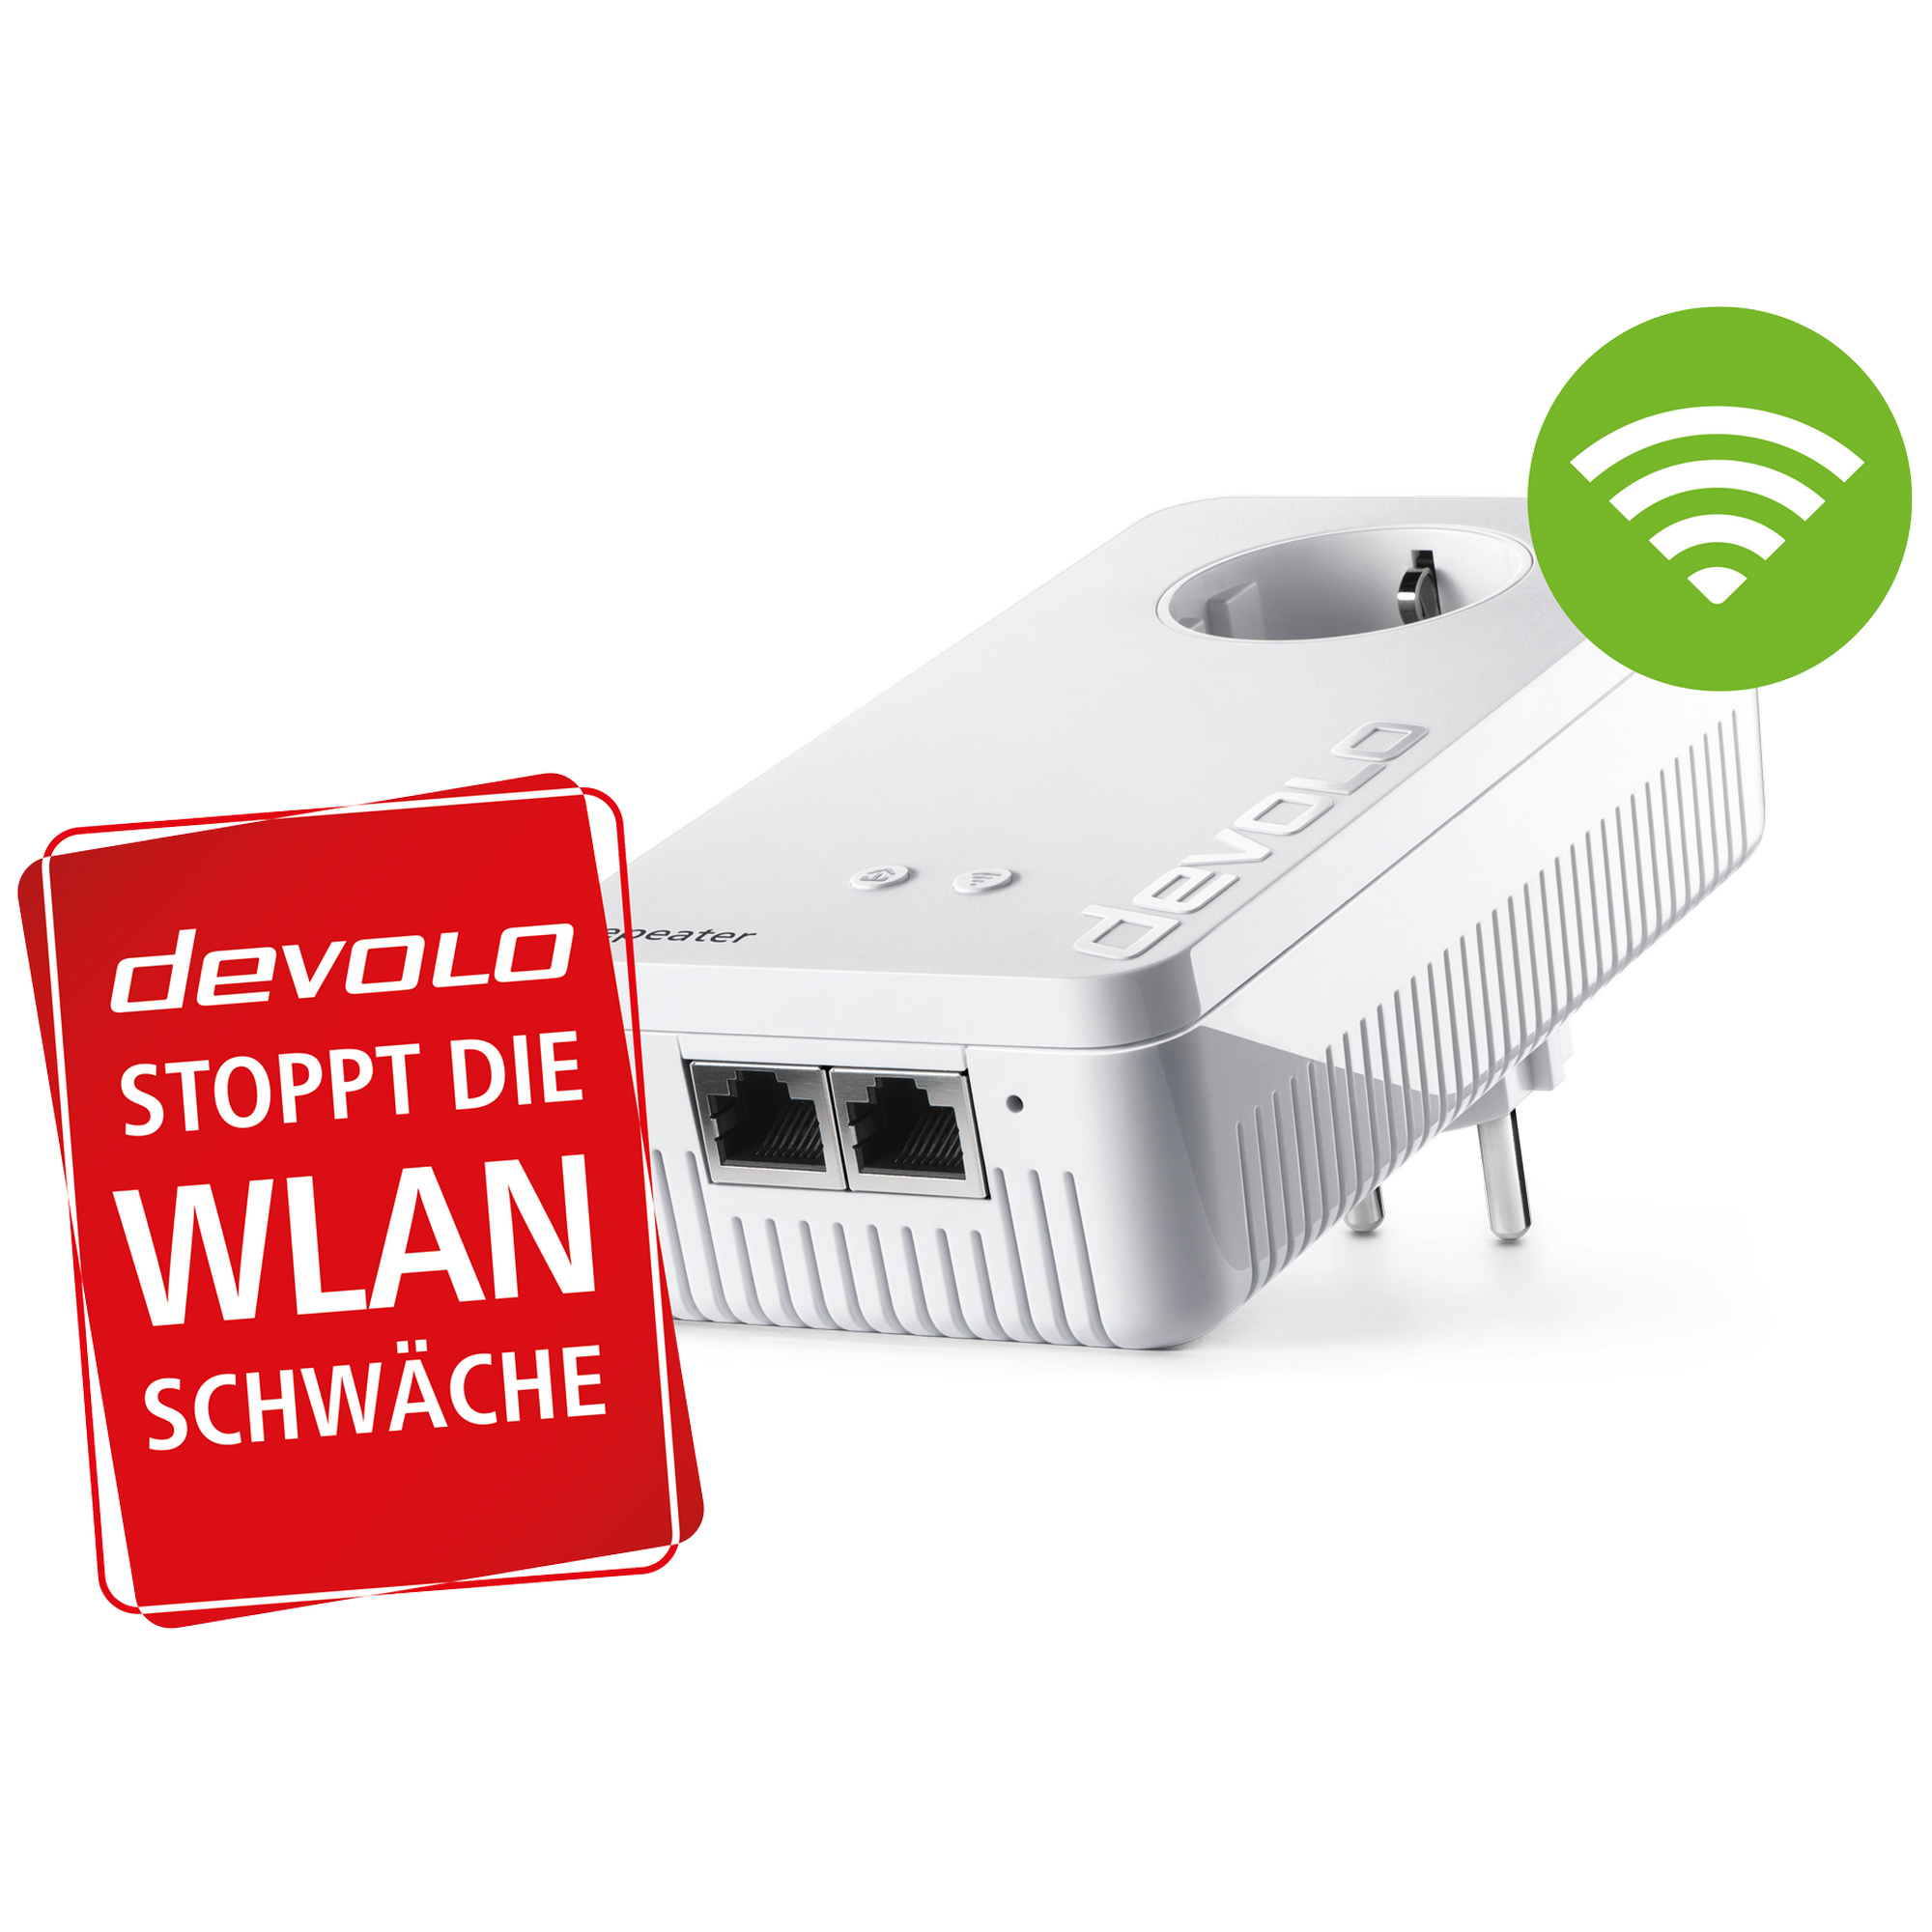 WLAN-Repeater 'Repeater+ ac' weiß 2,4/5 GHz 867 Mbit/s + product picture